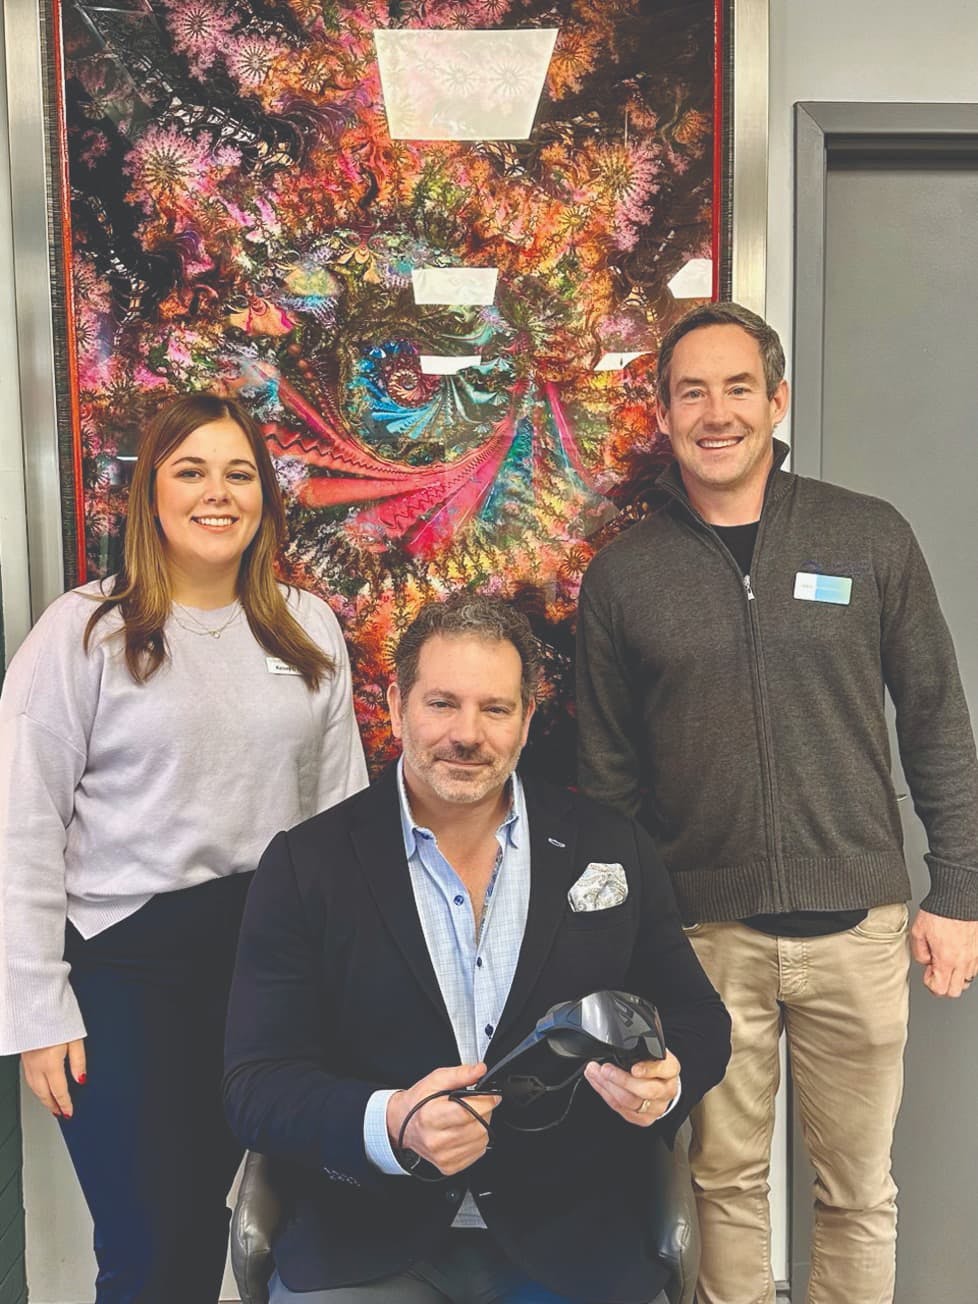 Steve R. Sarkisian Jr, MD, and Kelsey O’Neil (Glaukos Corporation diagnostics team) after a successful implementation visit with Brian Murphey from Radius XR.